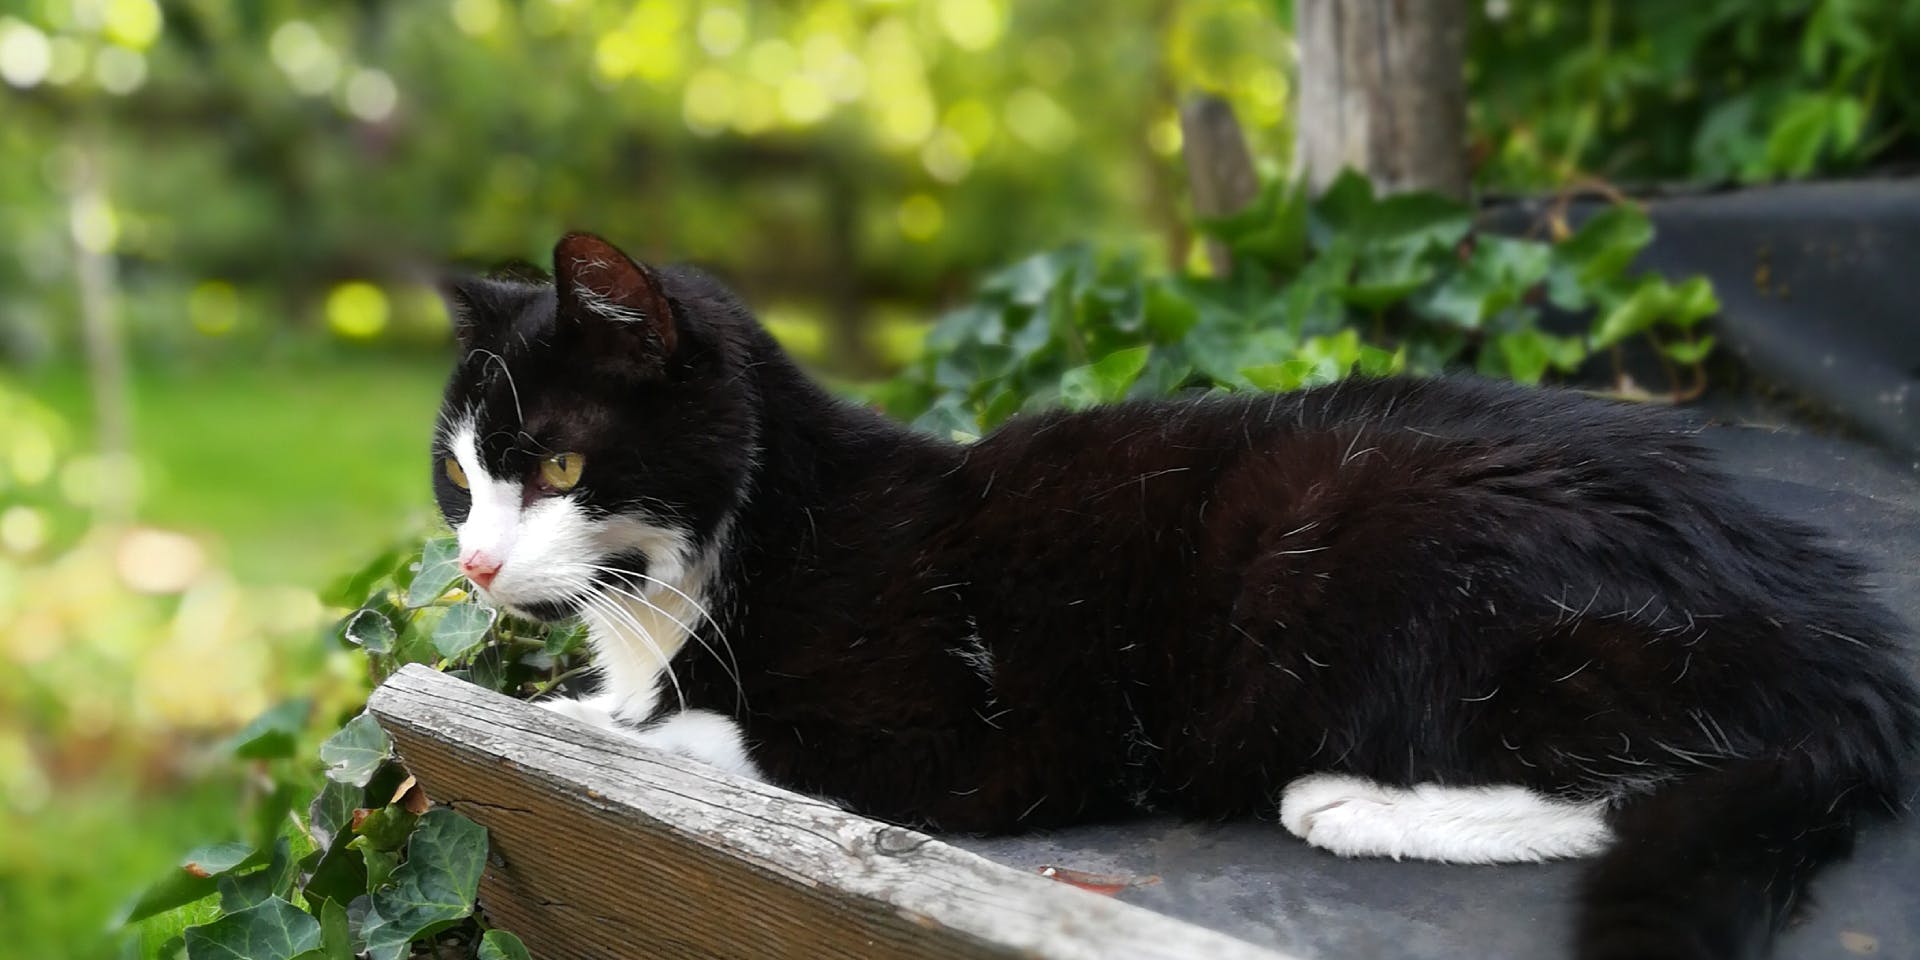 A black and white cat sitting in a green garden